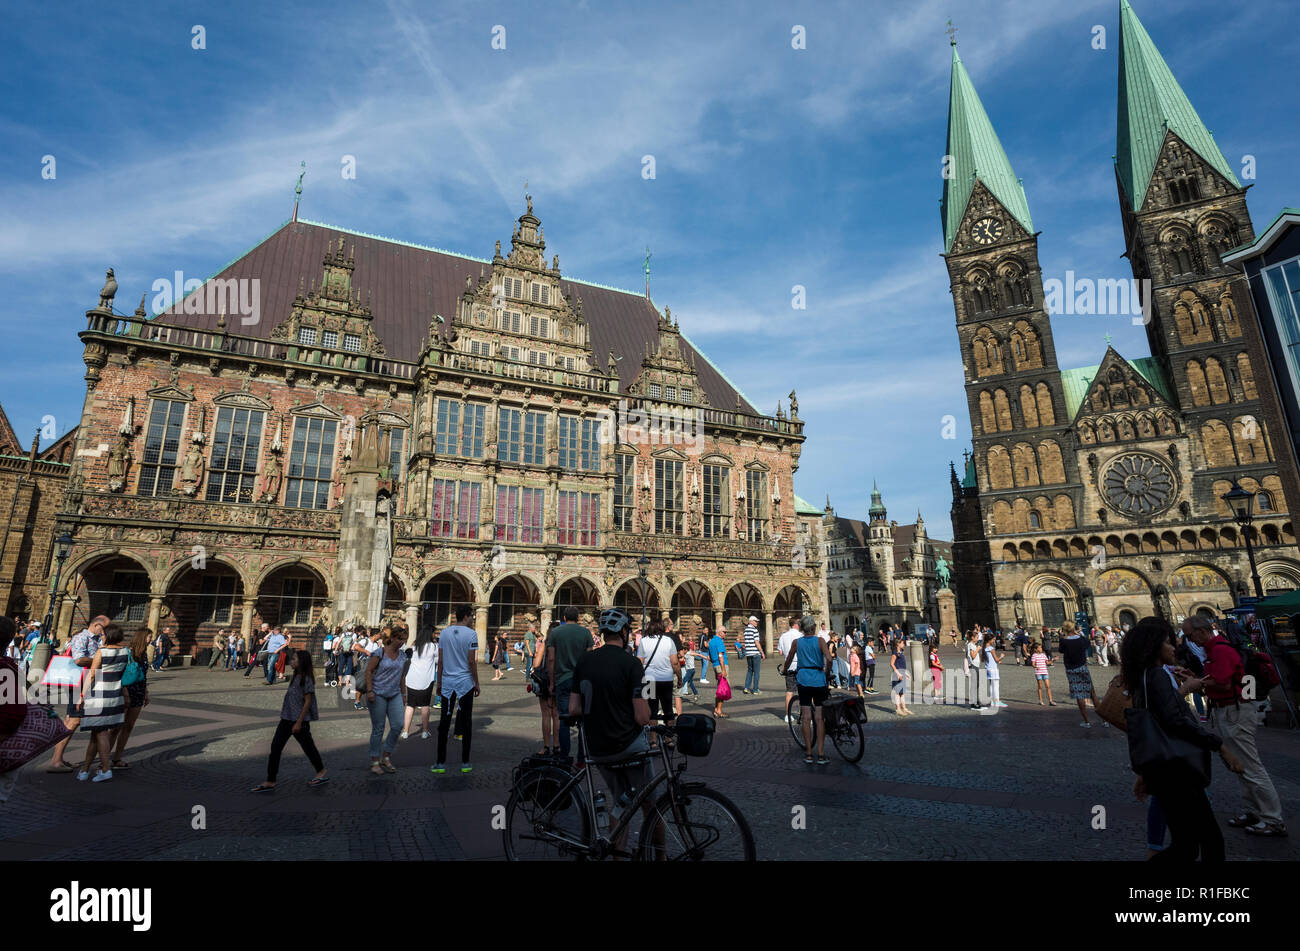 Marktplatz, Bremen. Deutschland Germany.  A scene looking across the market square towards the town hall, Rathous.  It's a sunny day so there are many tourist holiday makers out exploring and enjoying the sunshine. Stock Photo